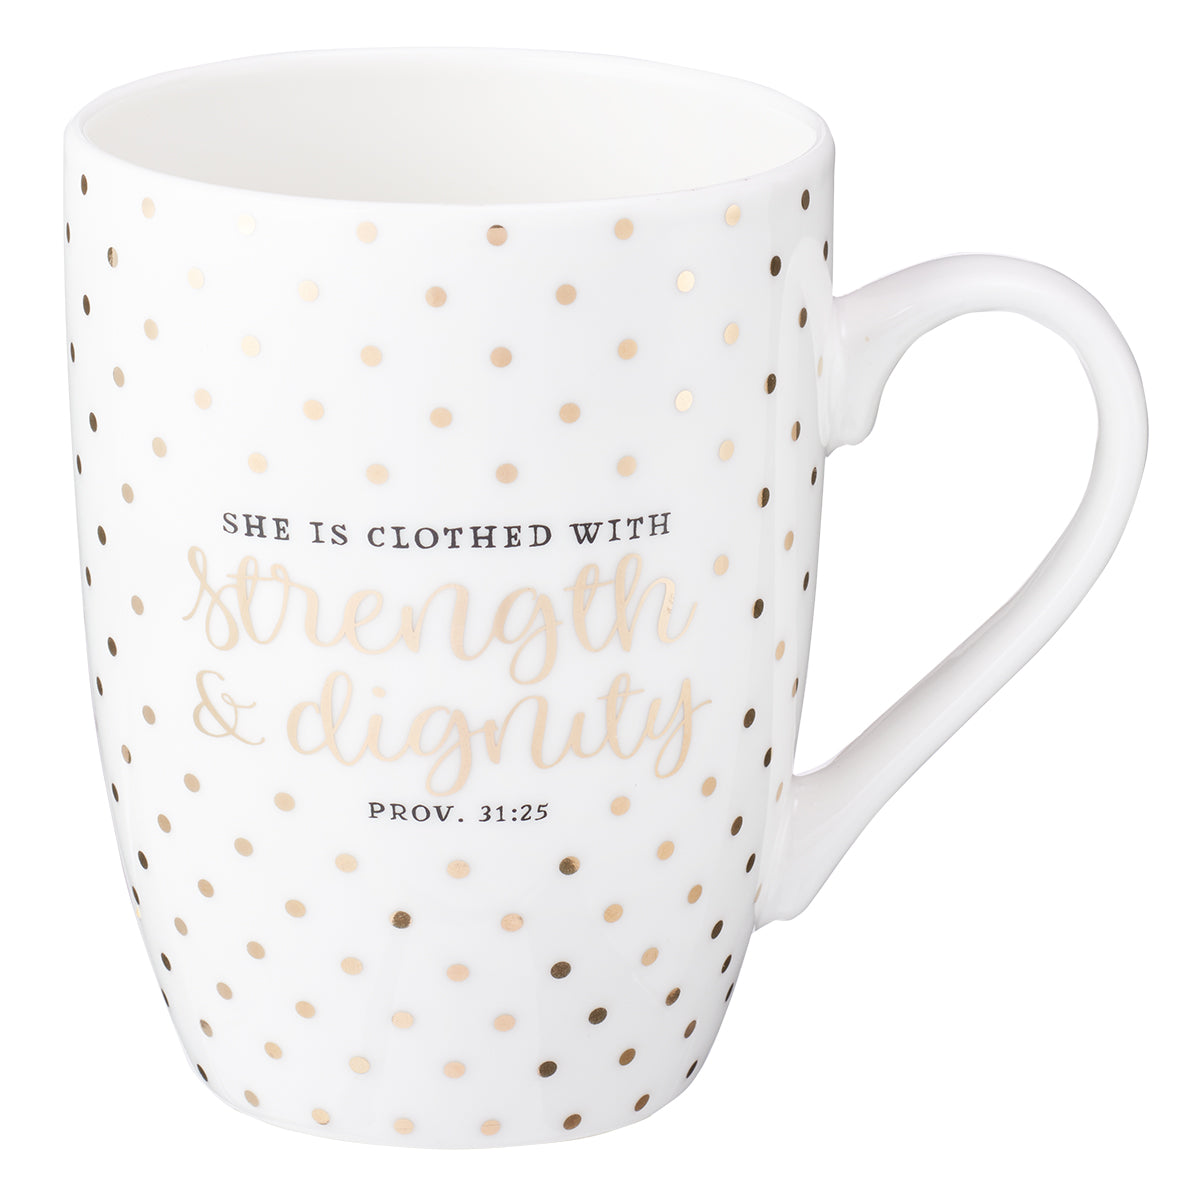 Image of Strength & Dignity Coffee Mug – Proverbs 31:25 other